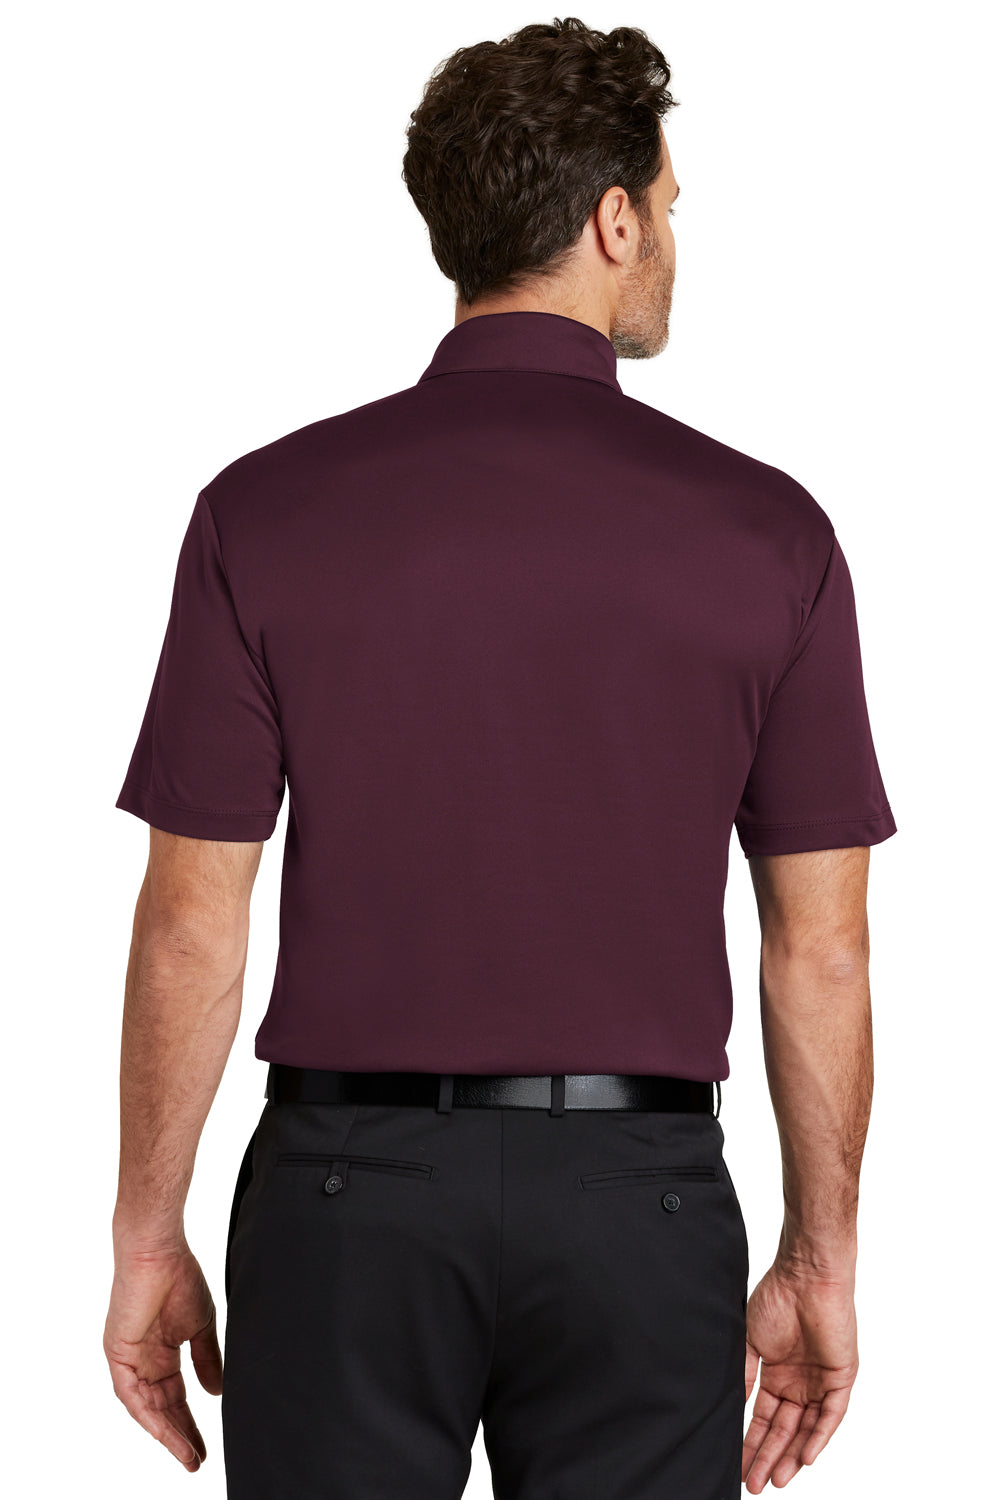 Port Authority K540 Mens Silk Touch Performance Moisture Wicking Short Sleeve Polo Shirt Maroon Back